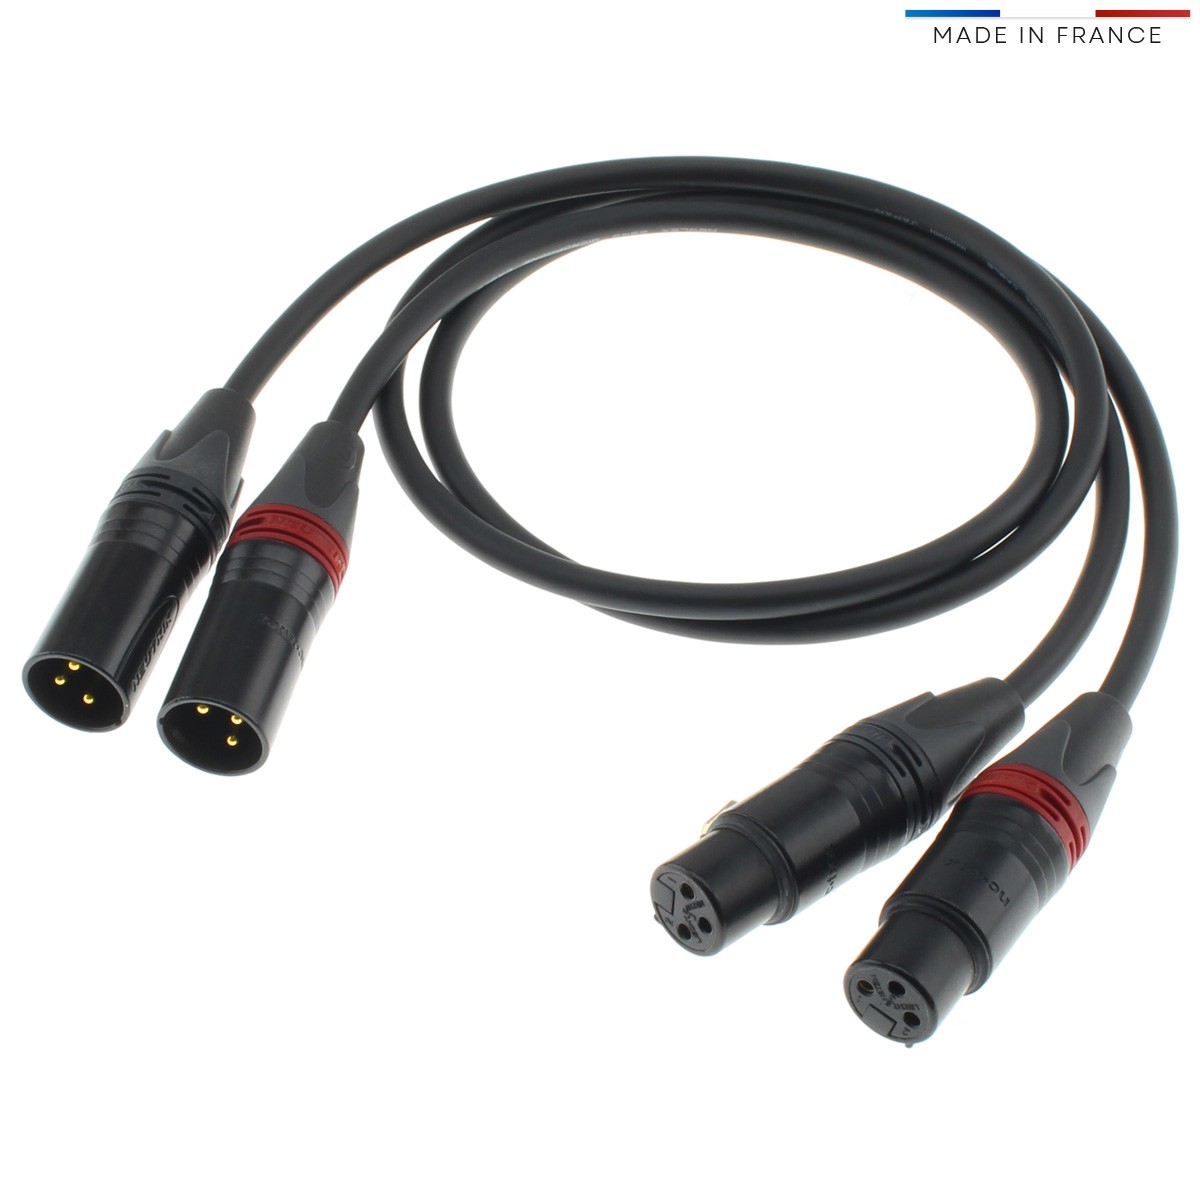 AUDIOPHONICS WIRE Interconnect Cable Stereo XLR OFC Copper Gold Plated 30cm (Pair)